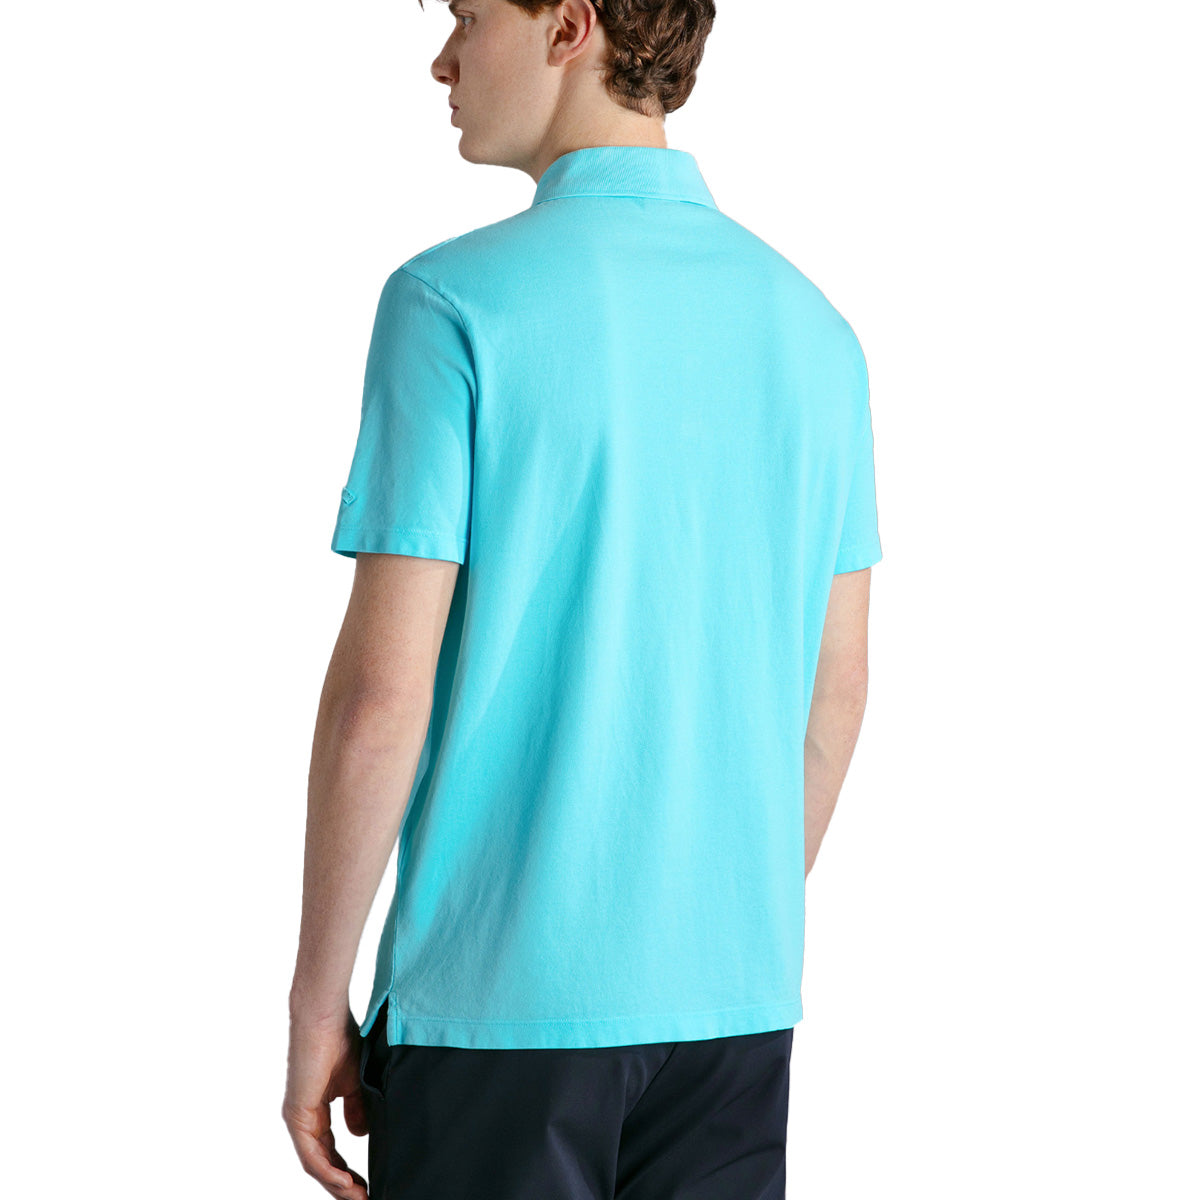 Washed Turquoise Cotton Piqué Polo Shirt S/S POLOS Paul & Shark   